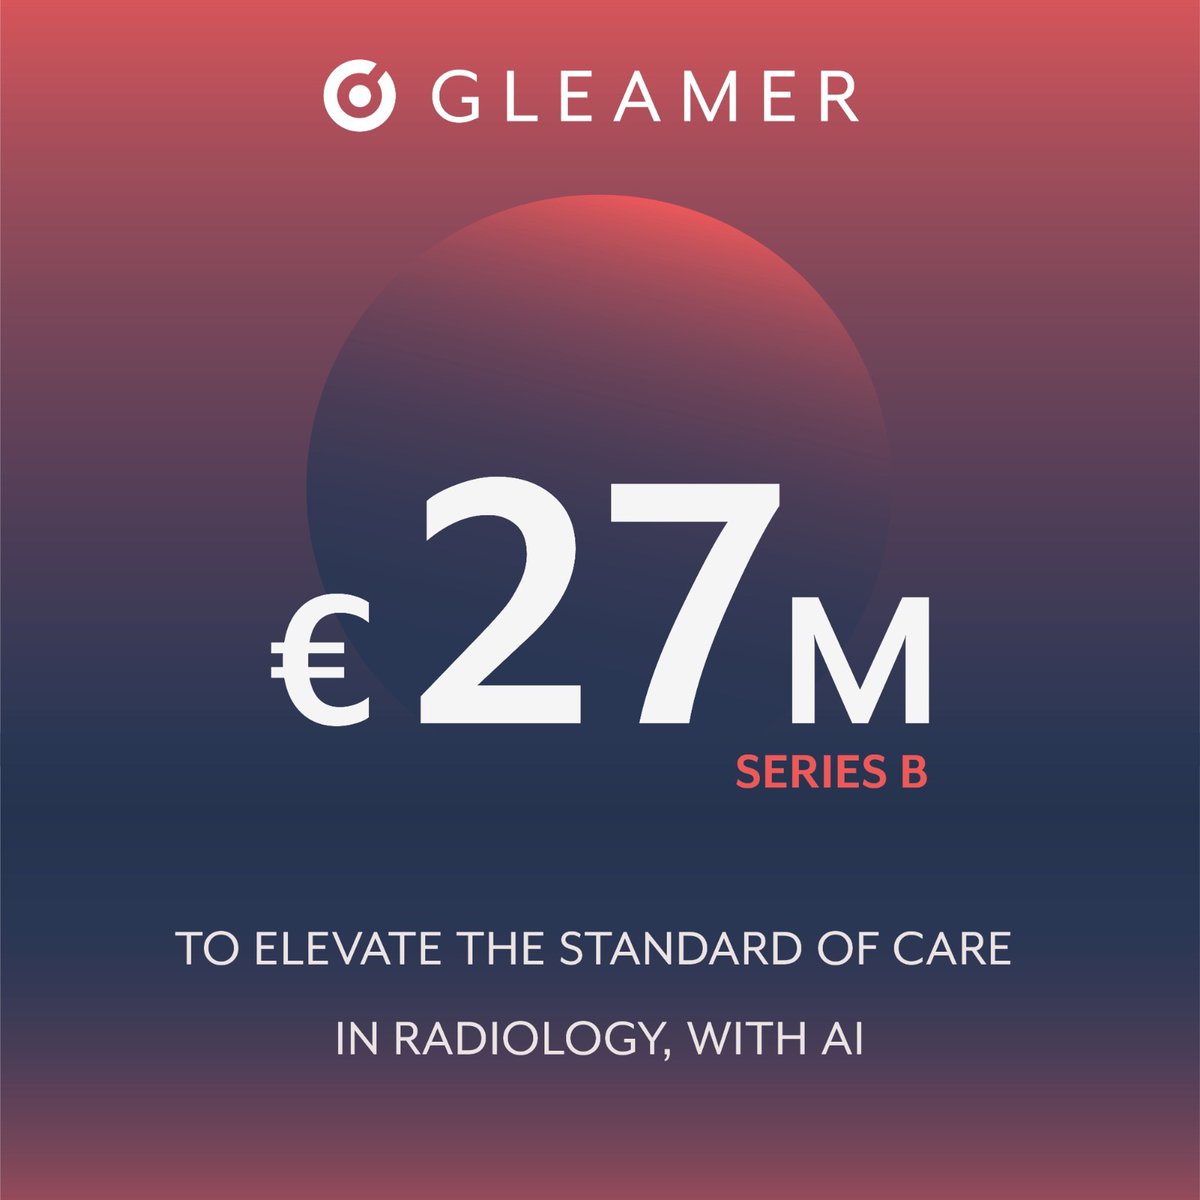 📢 We are thrilled to announce that Gleamer has successfully raised €27 million in Series B funding!

🚀 We are dedicated to revolutionizing healthcare by harnessing the power of artificial intelligence. 

To learn more: lnkd.in/epVQjf4H

#SeriesBFunding #AIinHealthcare